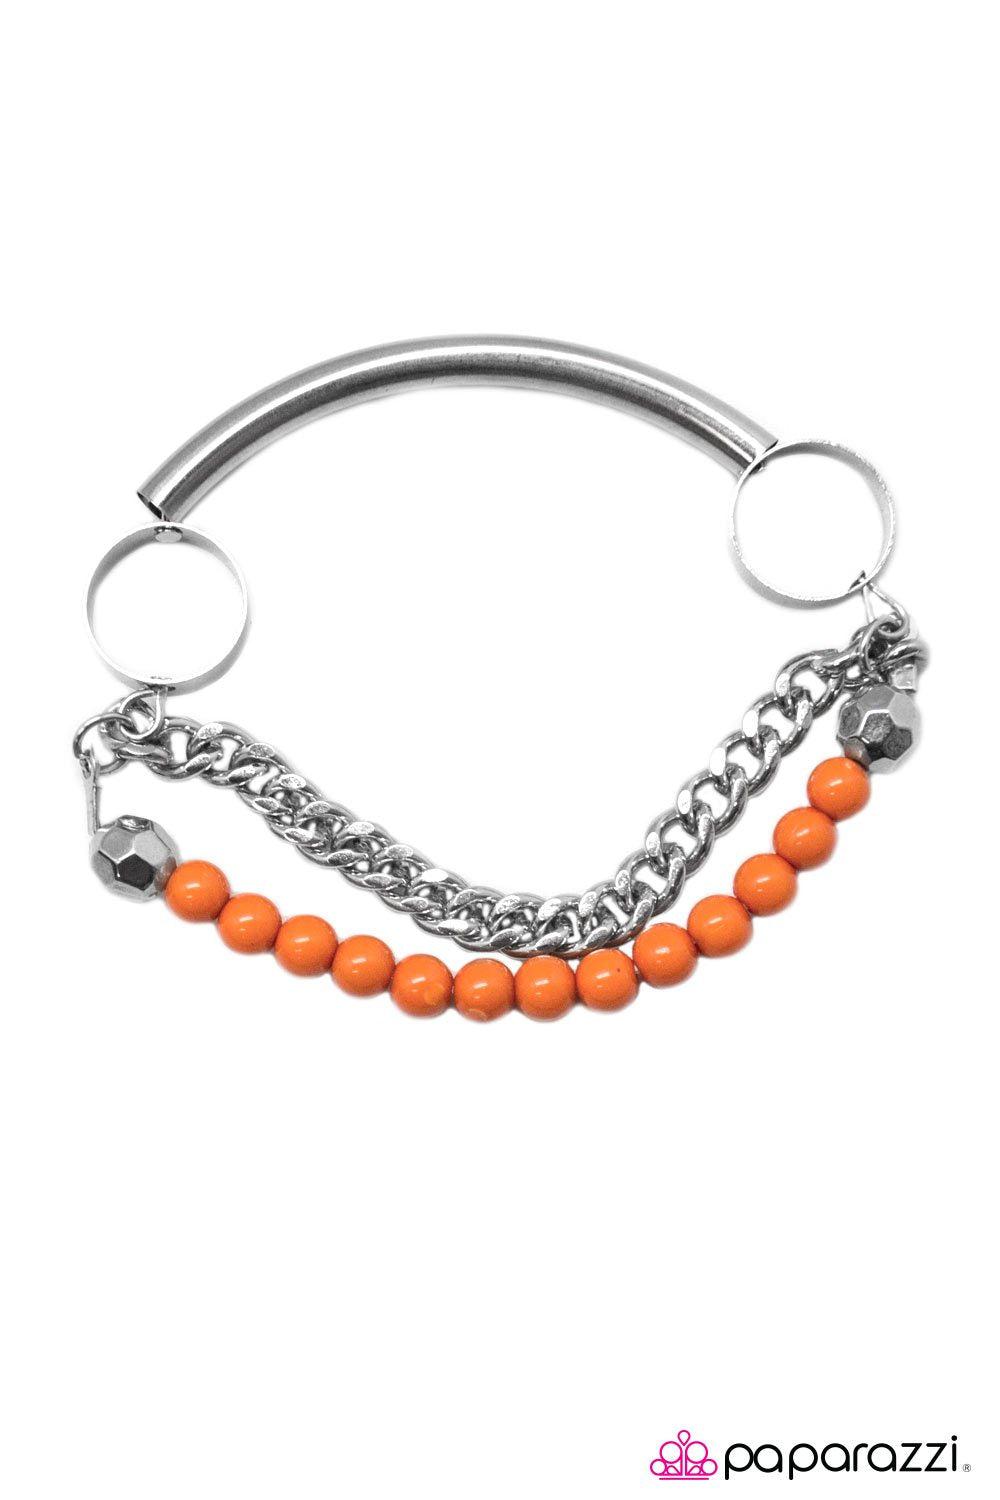 Wined and Dined Silver and Orange Bracelet - Paparazzi Accessories-CarasShop.com - $5 Jewelry by Cara Jewels